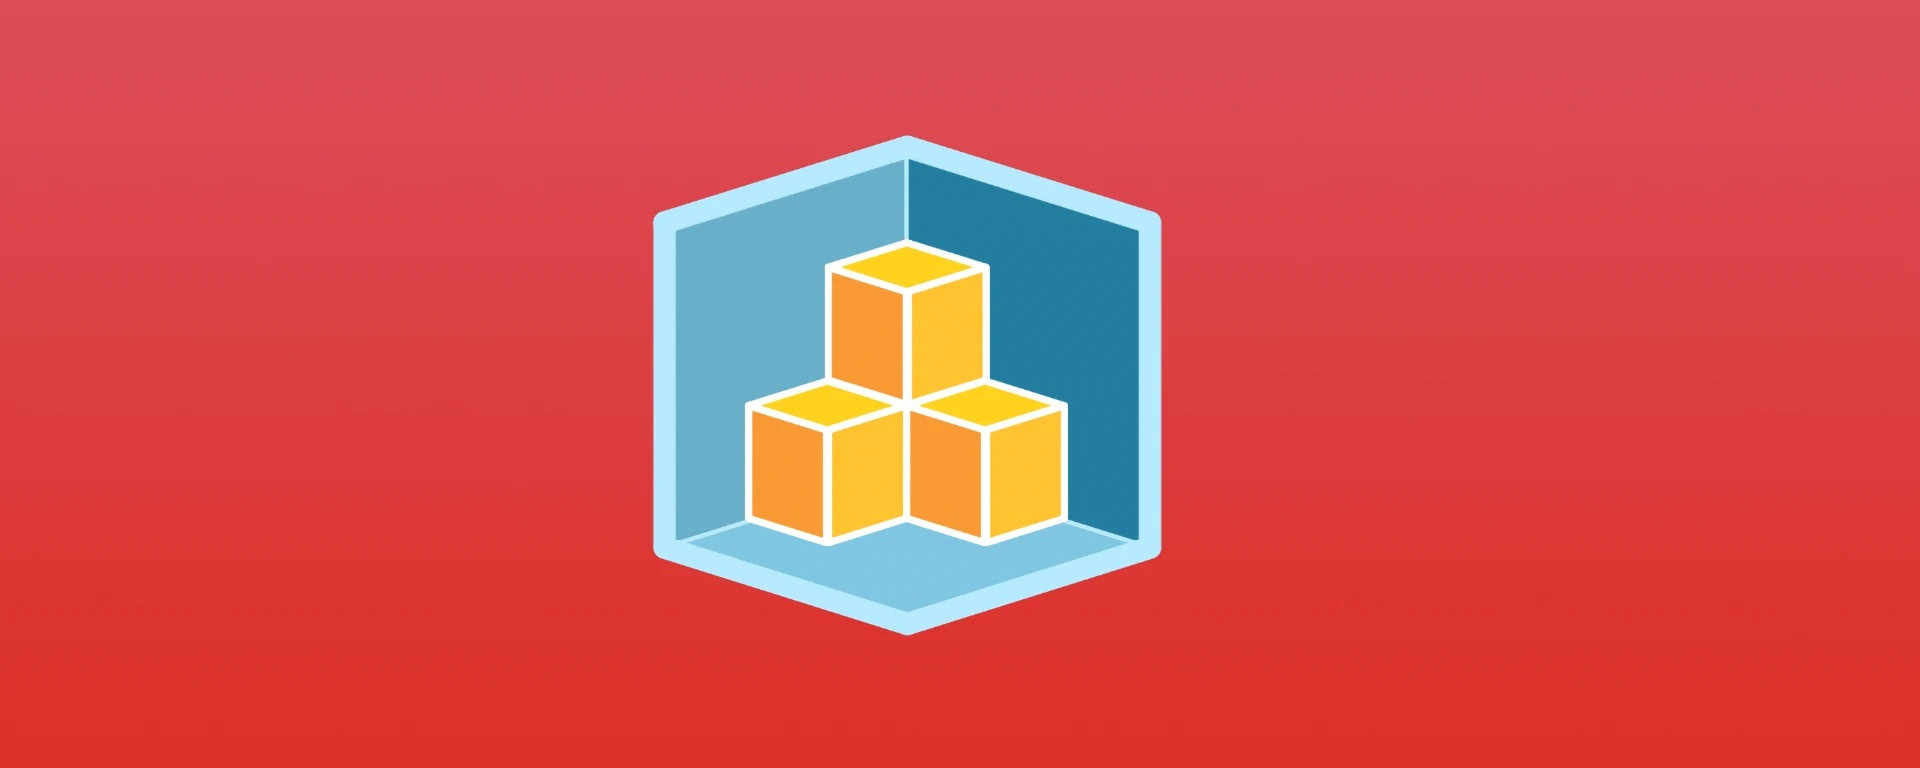 Application Load Balanced Fargate Service example in AWS CDK